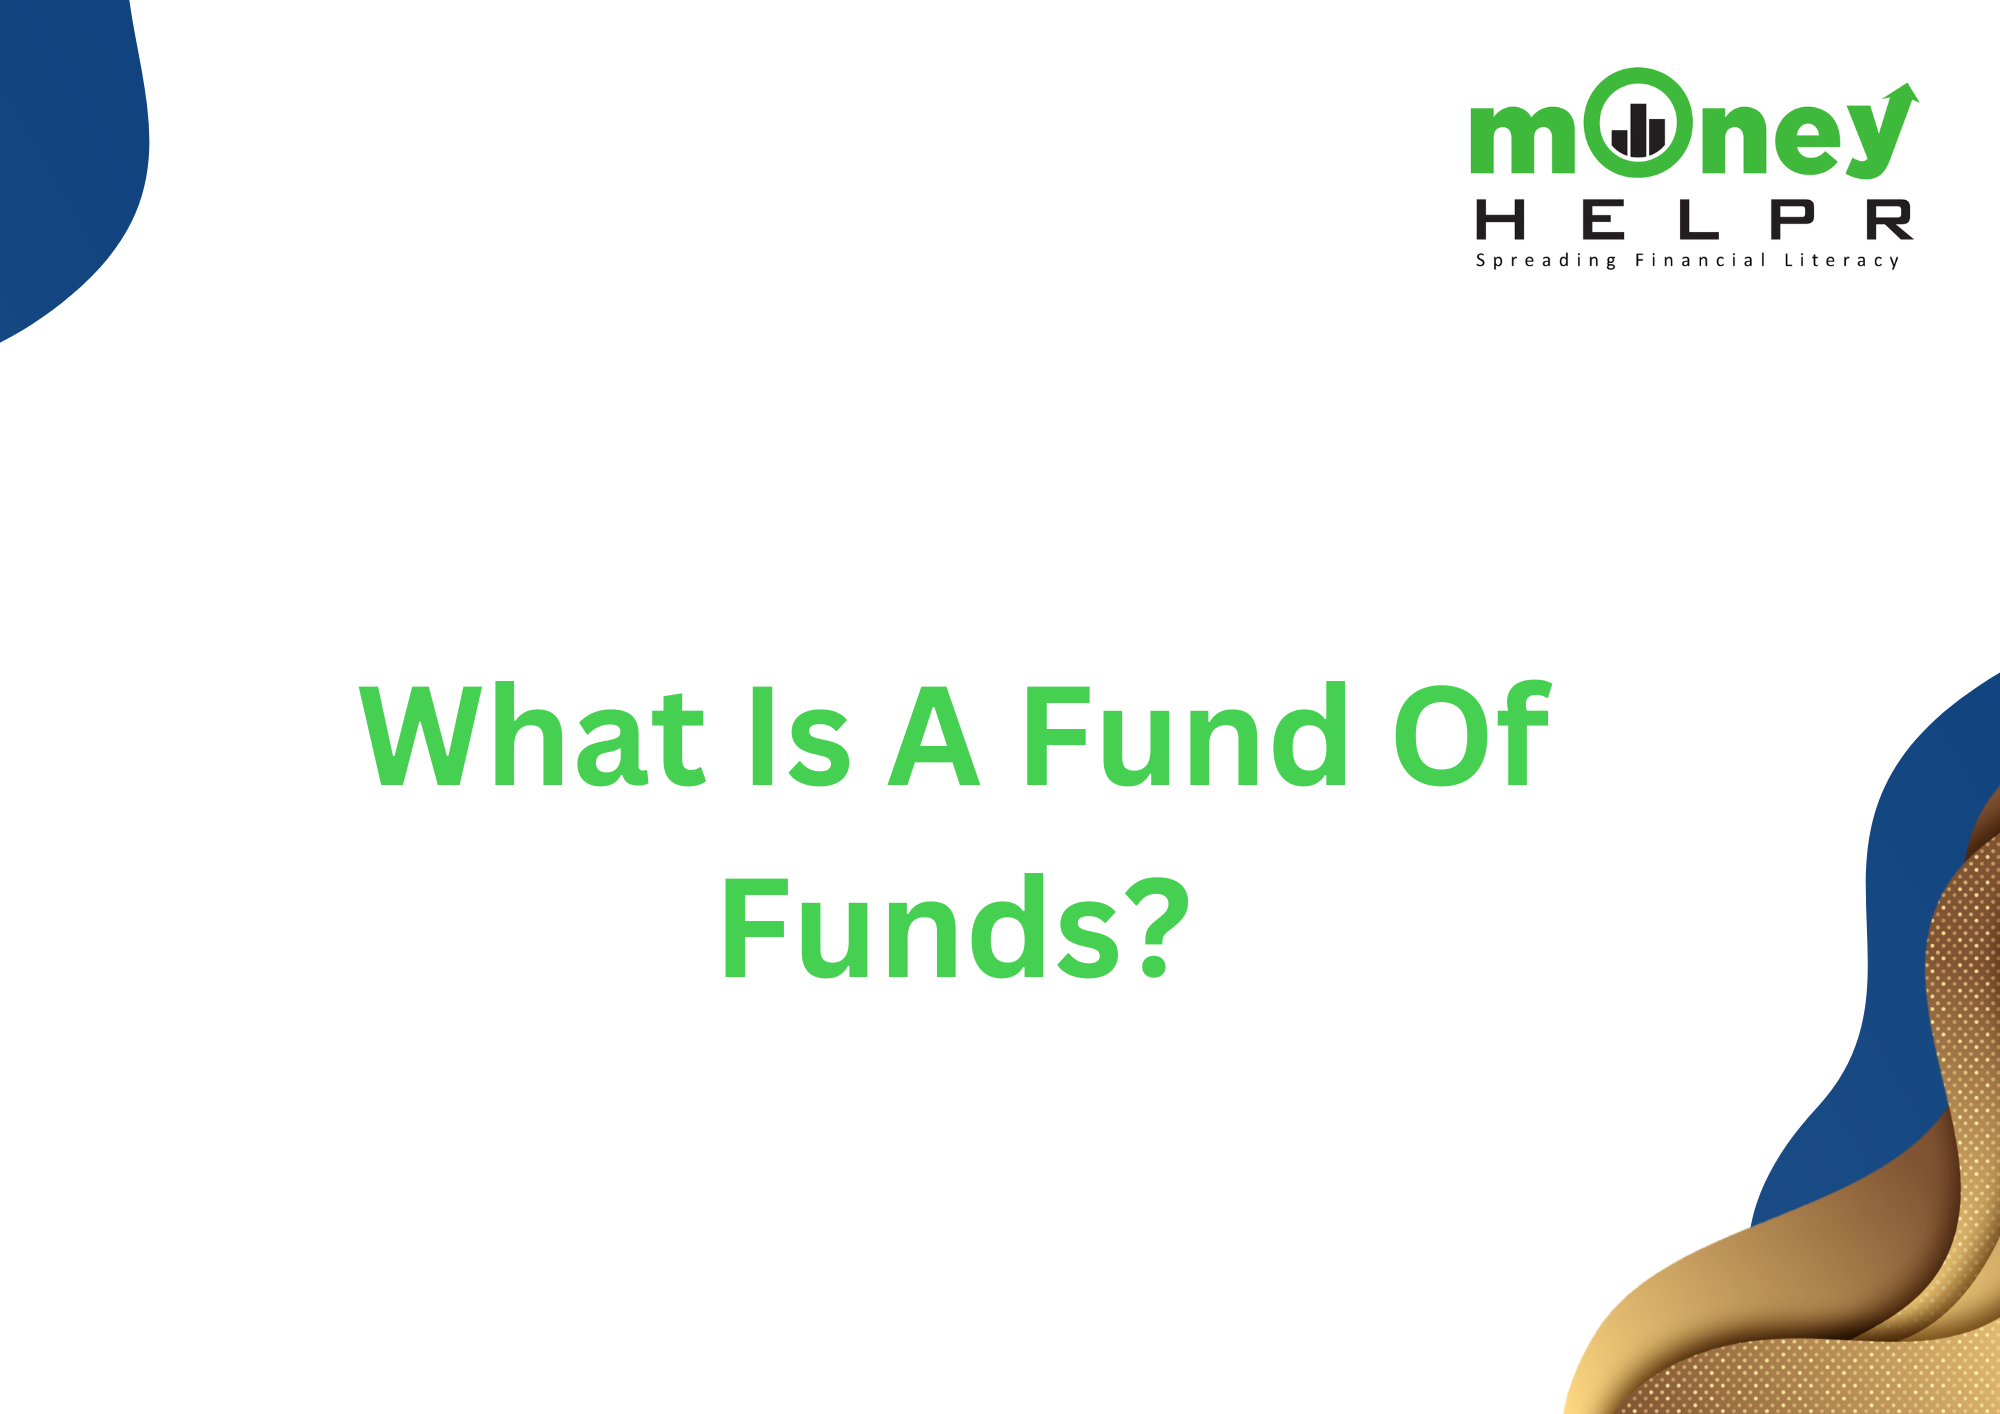 What Is A Fund Of Funds?